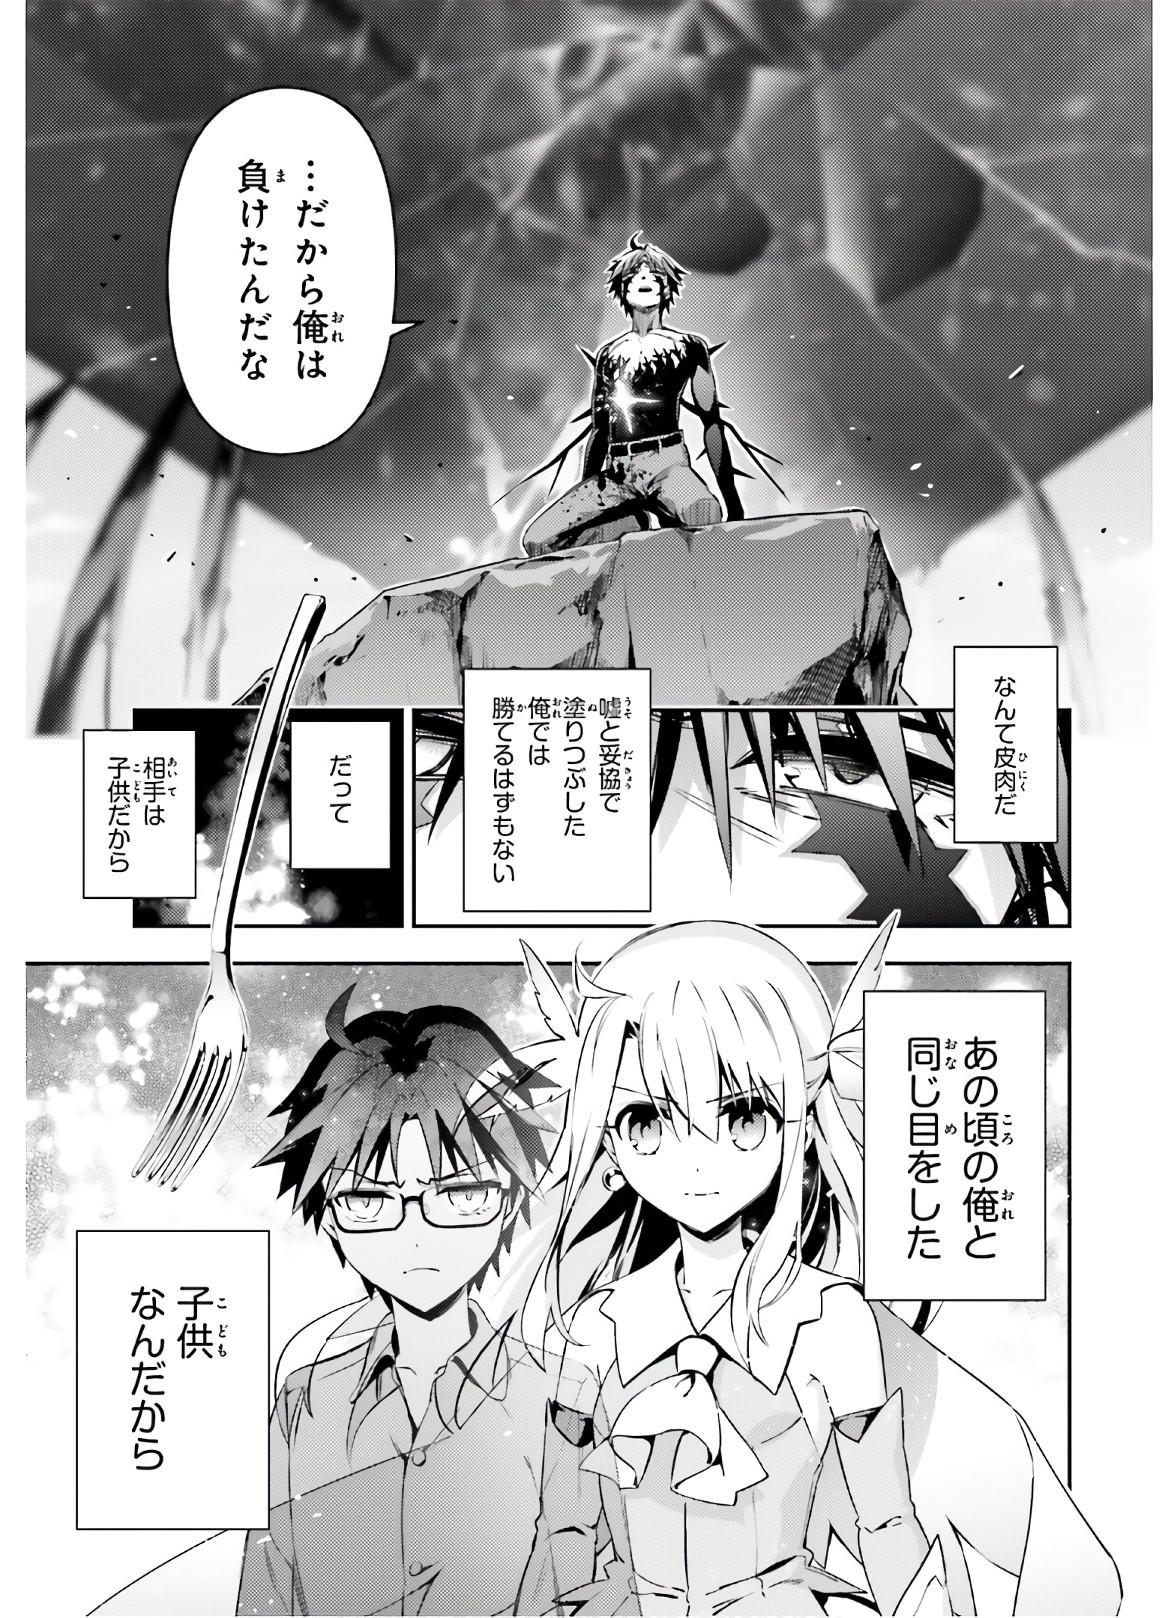 Fate/Kaleid Liner Prisma Illya Drei! - Chapter 57-1 - Page 9